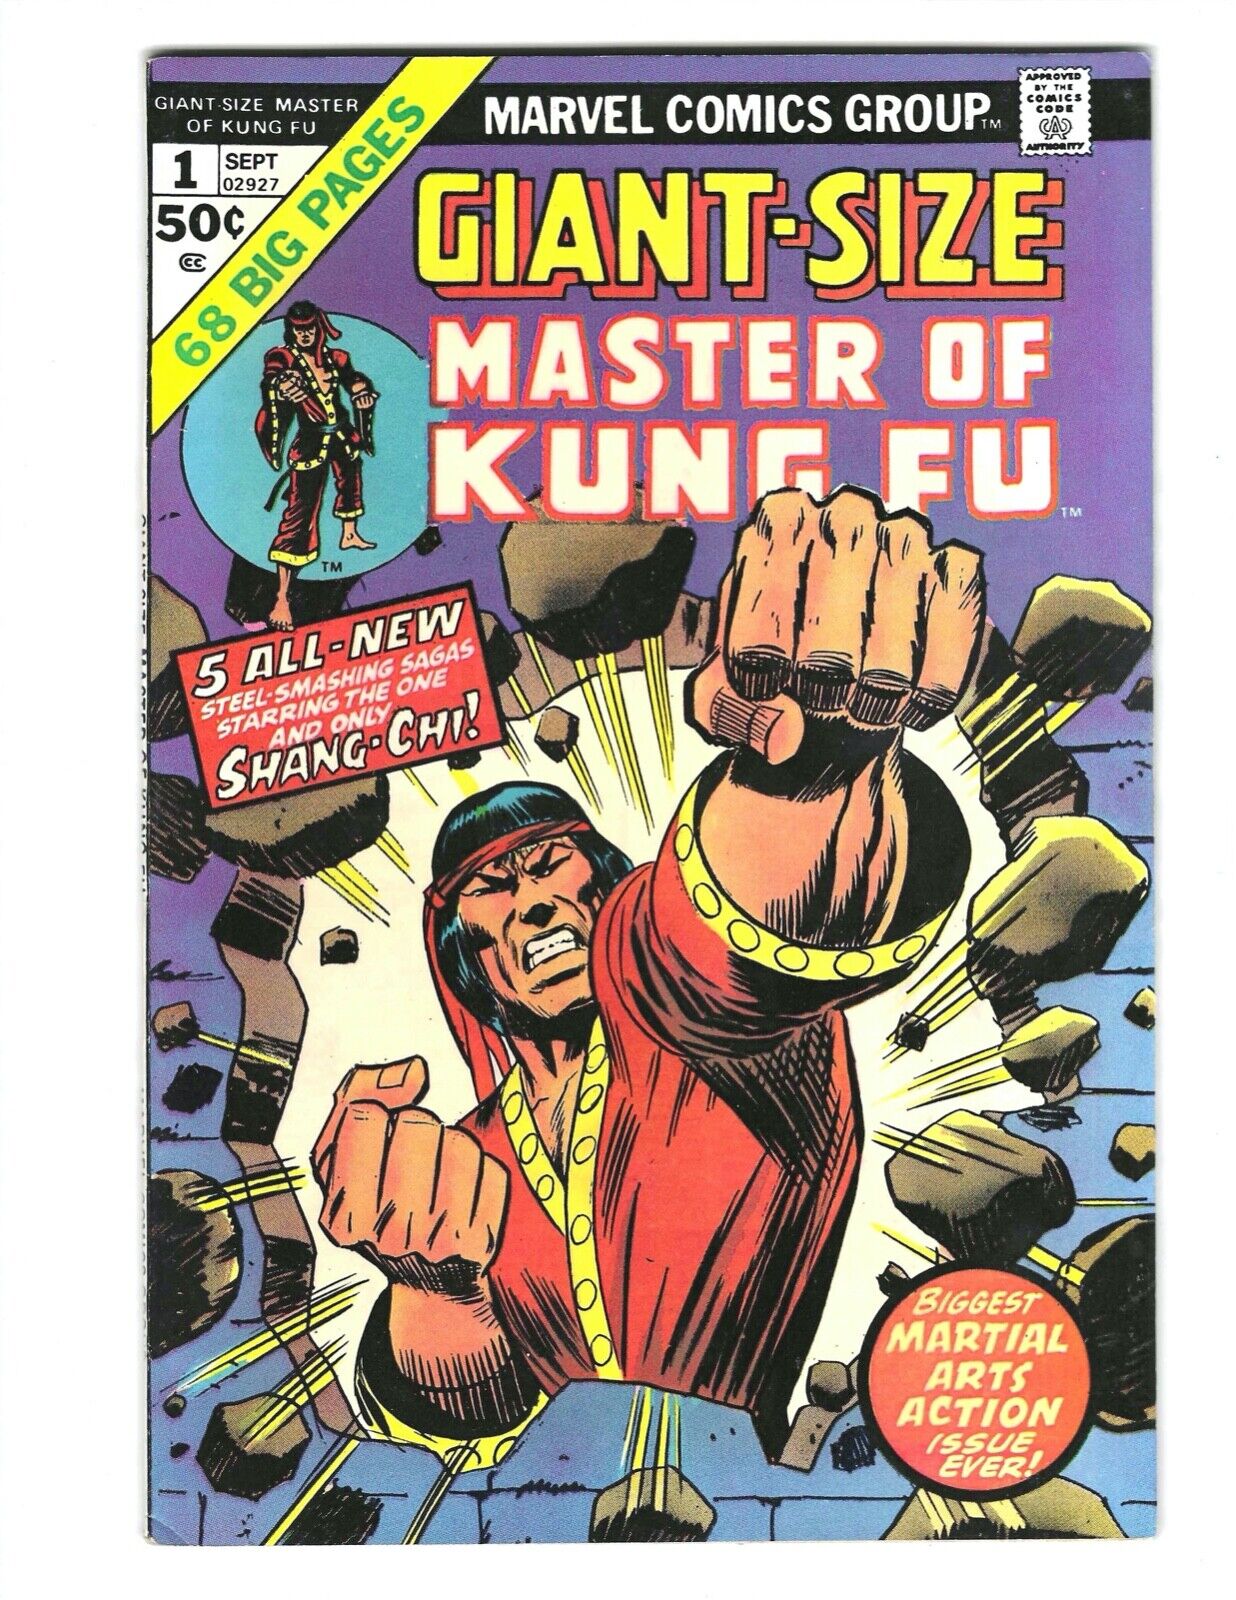 Giant-Size Master of Kung-Fu #1 1974 VF/NM or better Beauty Shang Chi Combine